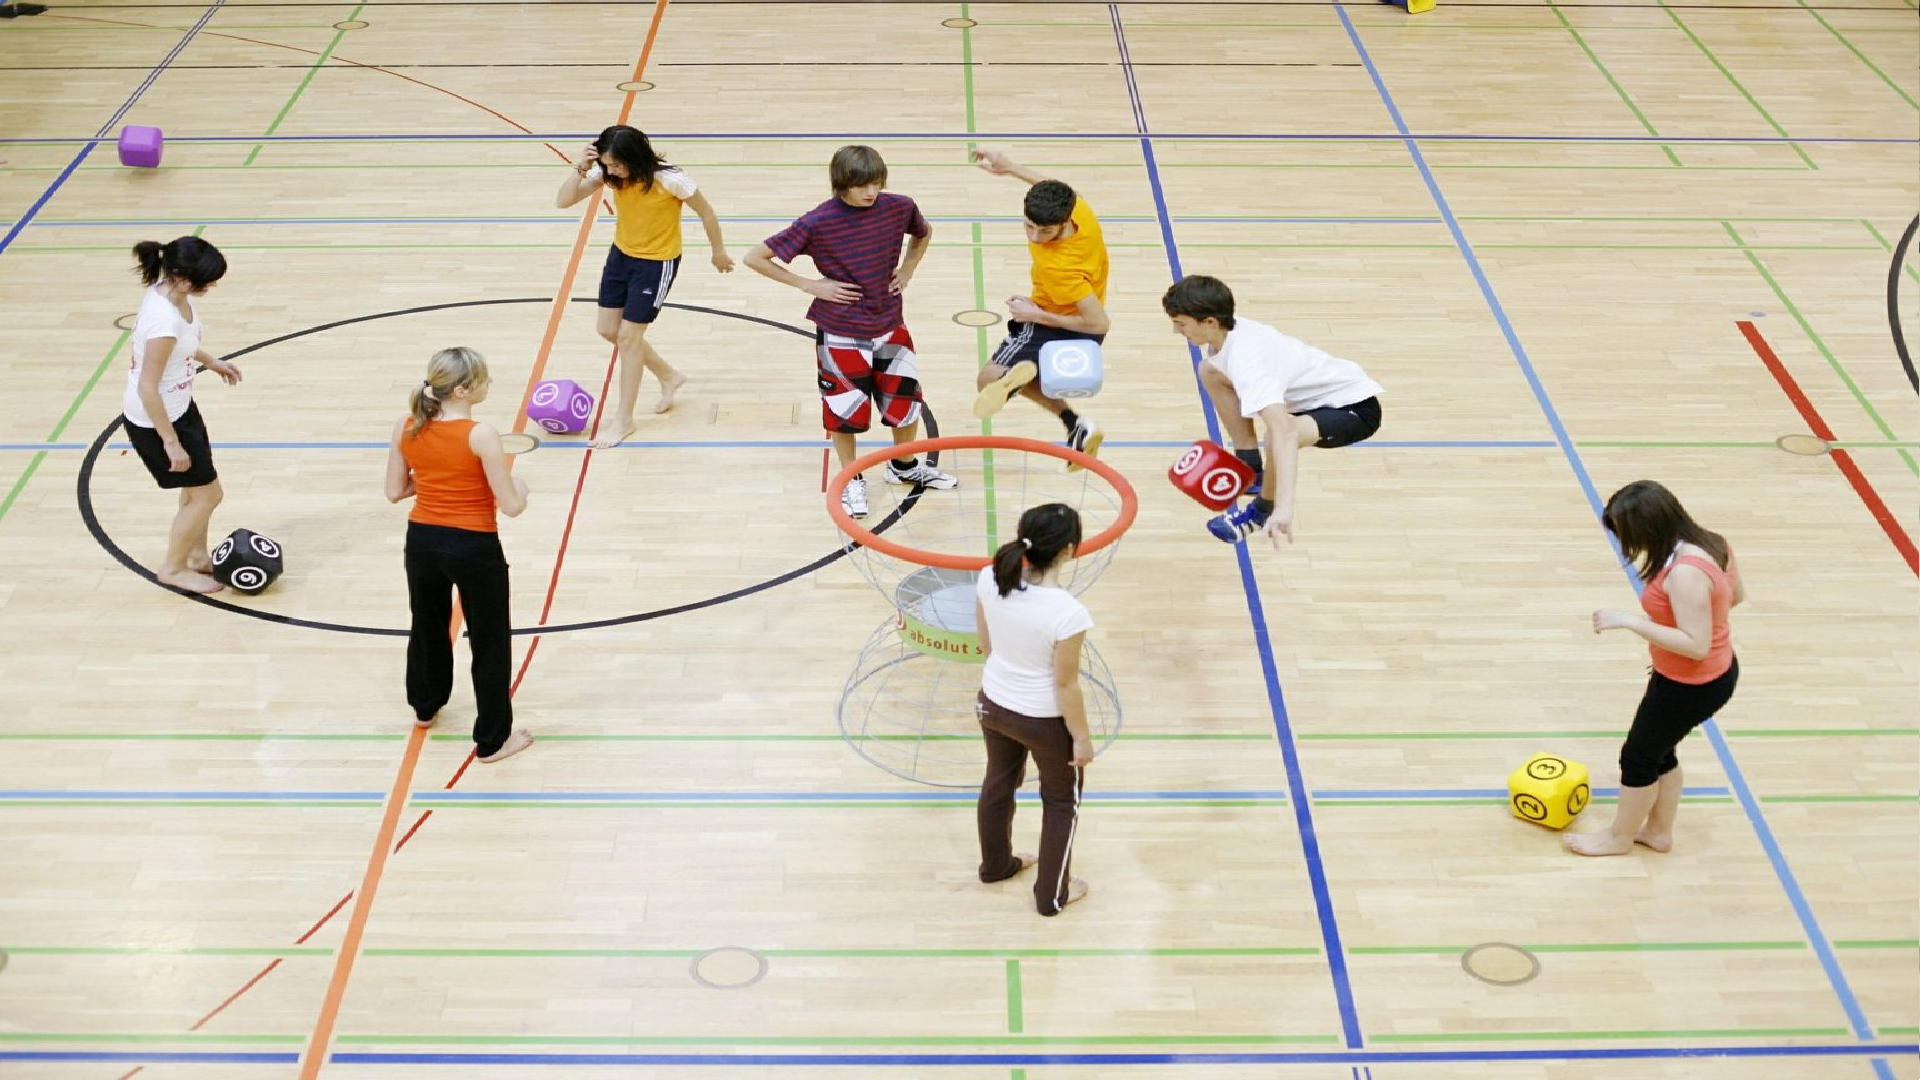 Several people participating in a sporting activity